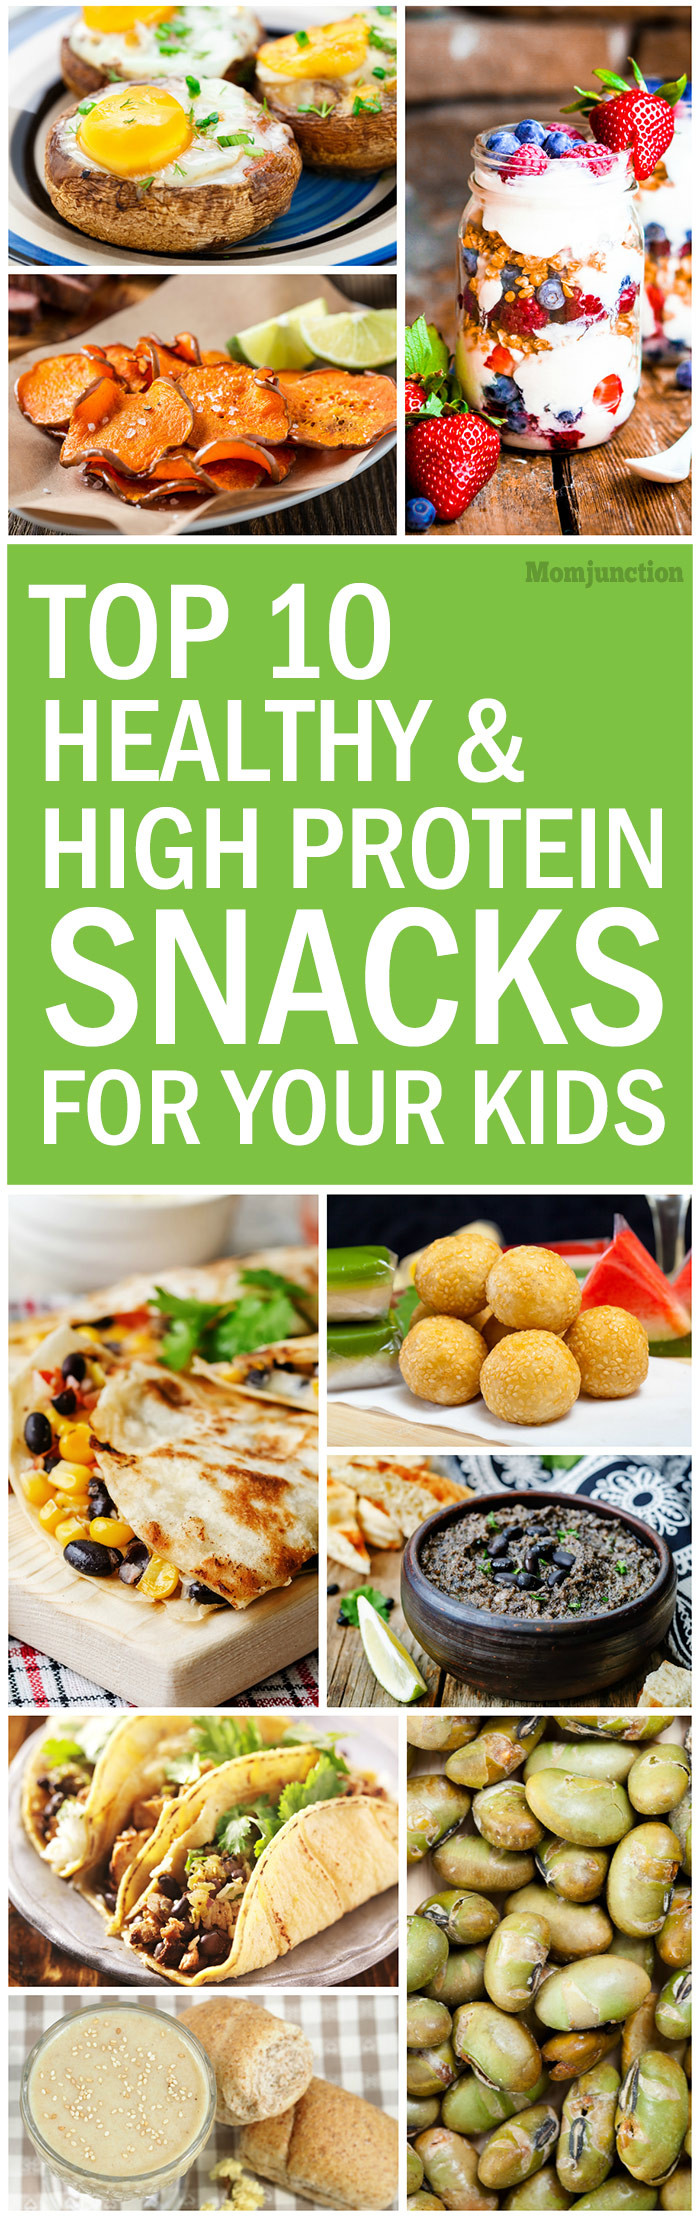 Healthy Snacks High In Protein
 10 Healthy And High Protein Snacks For Kids